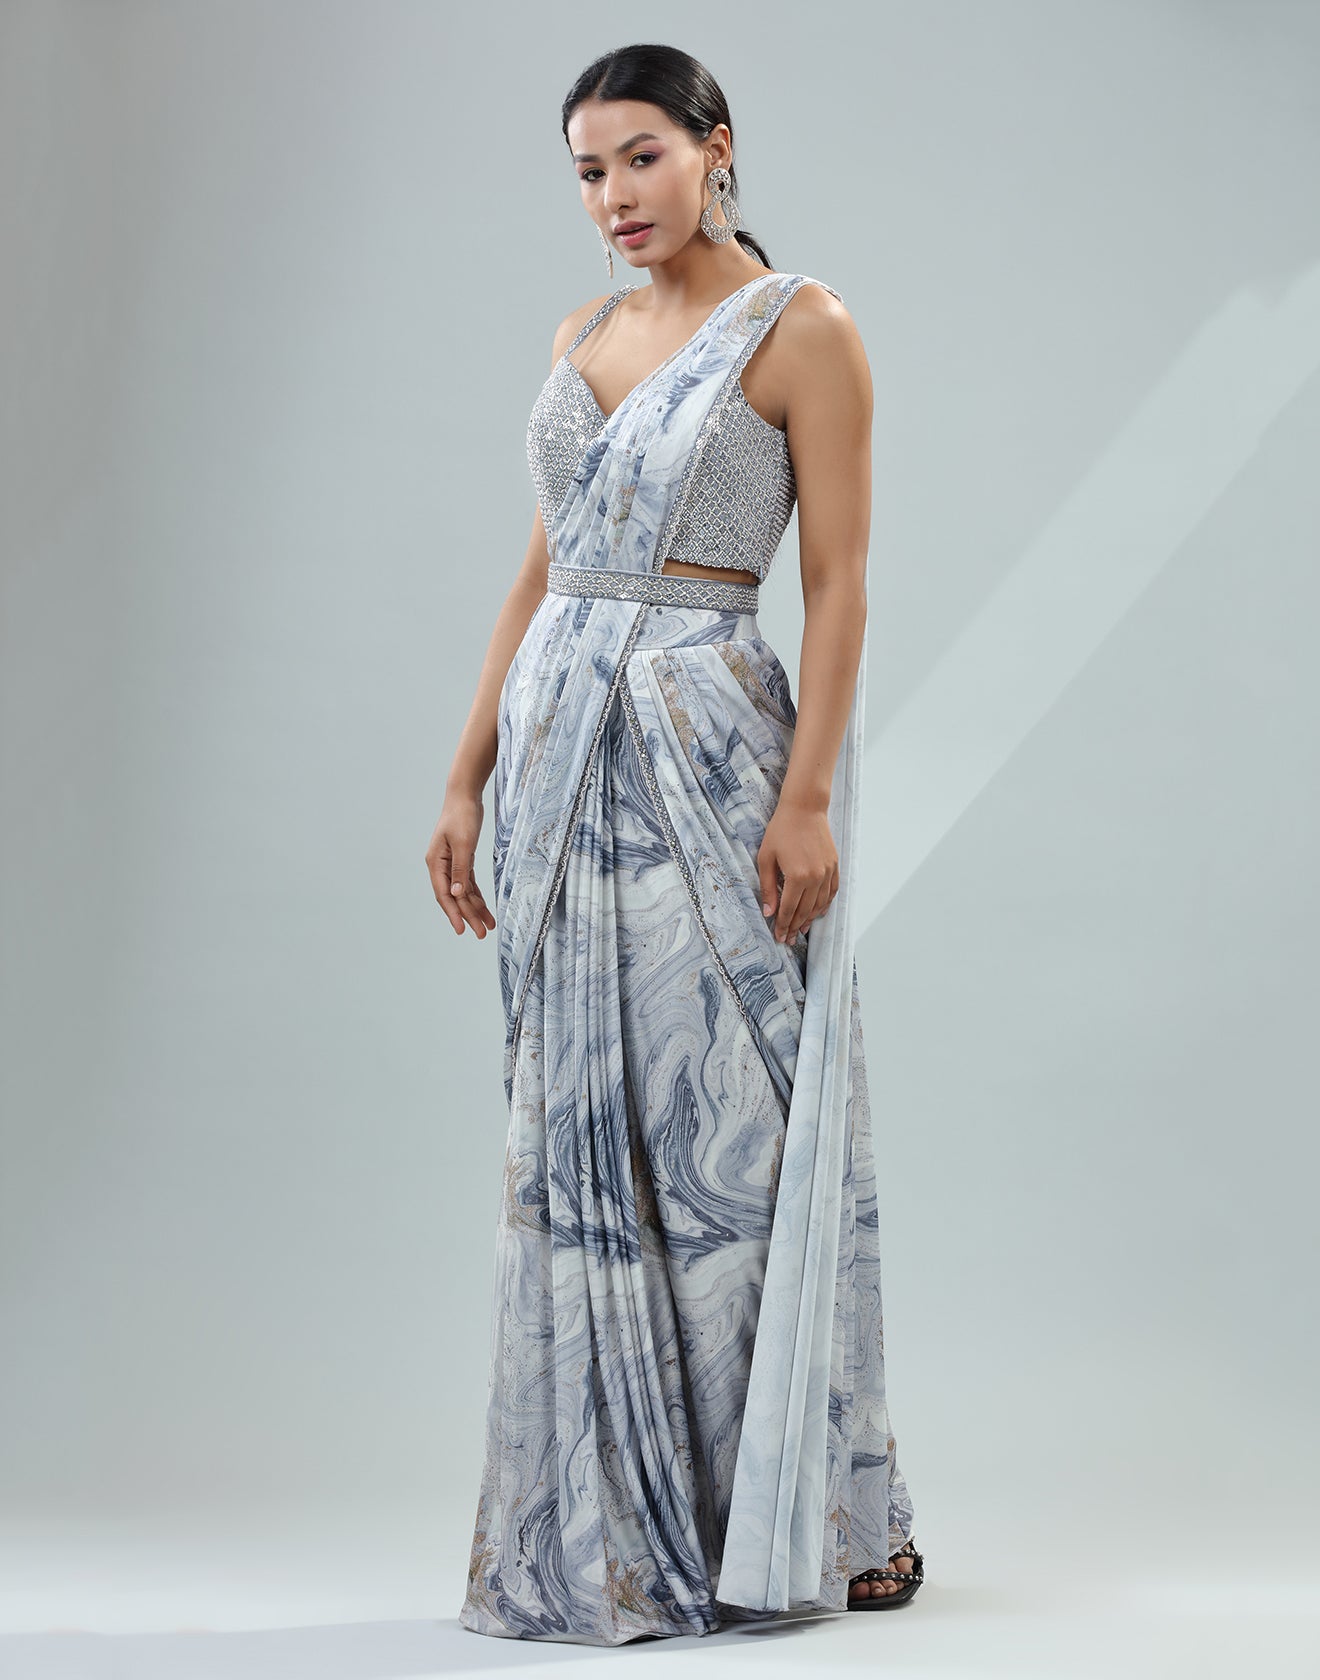 Serenity Blue Pre-Stitched Saree With Embellished Corset Blouse